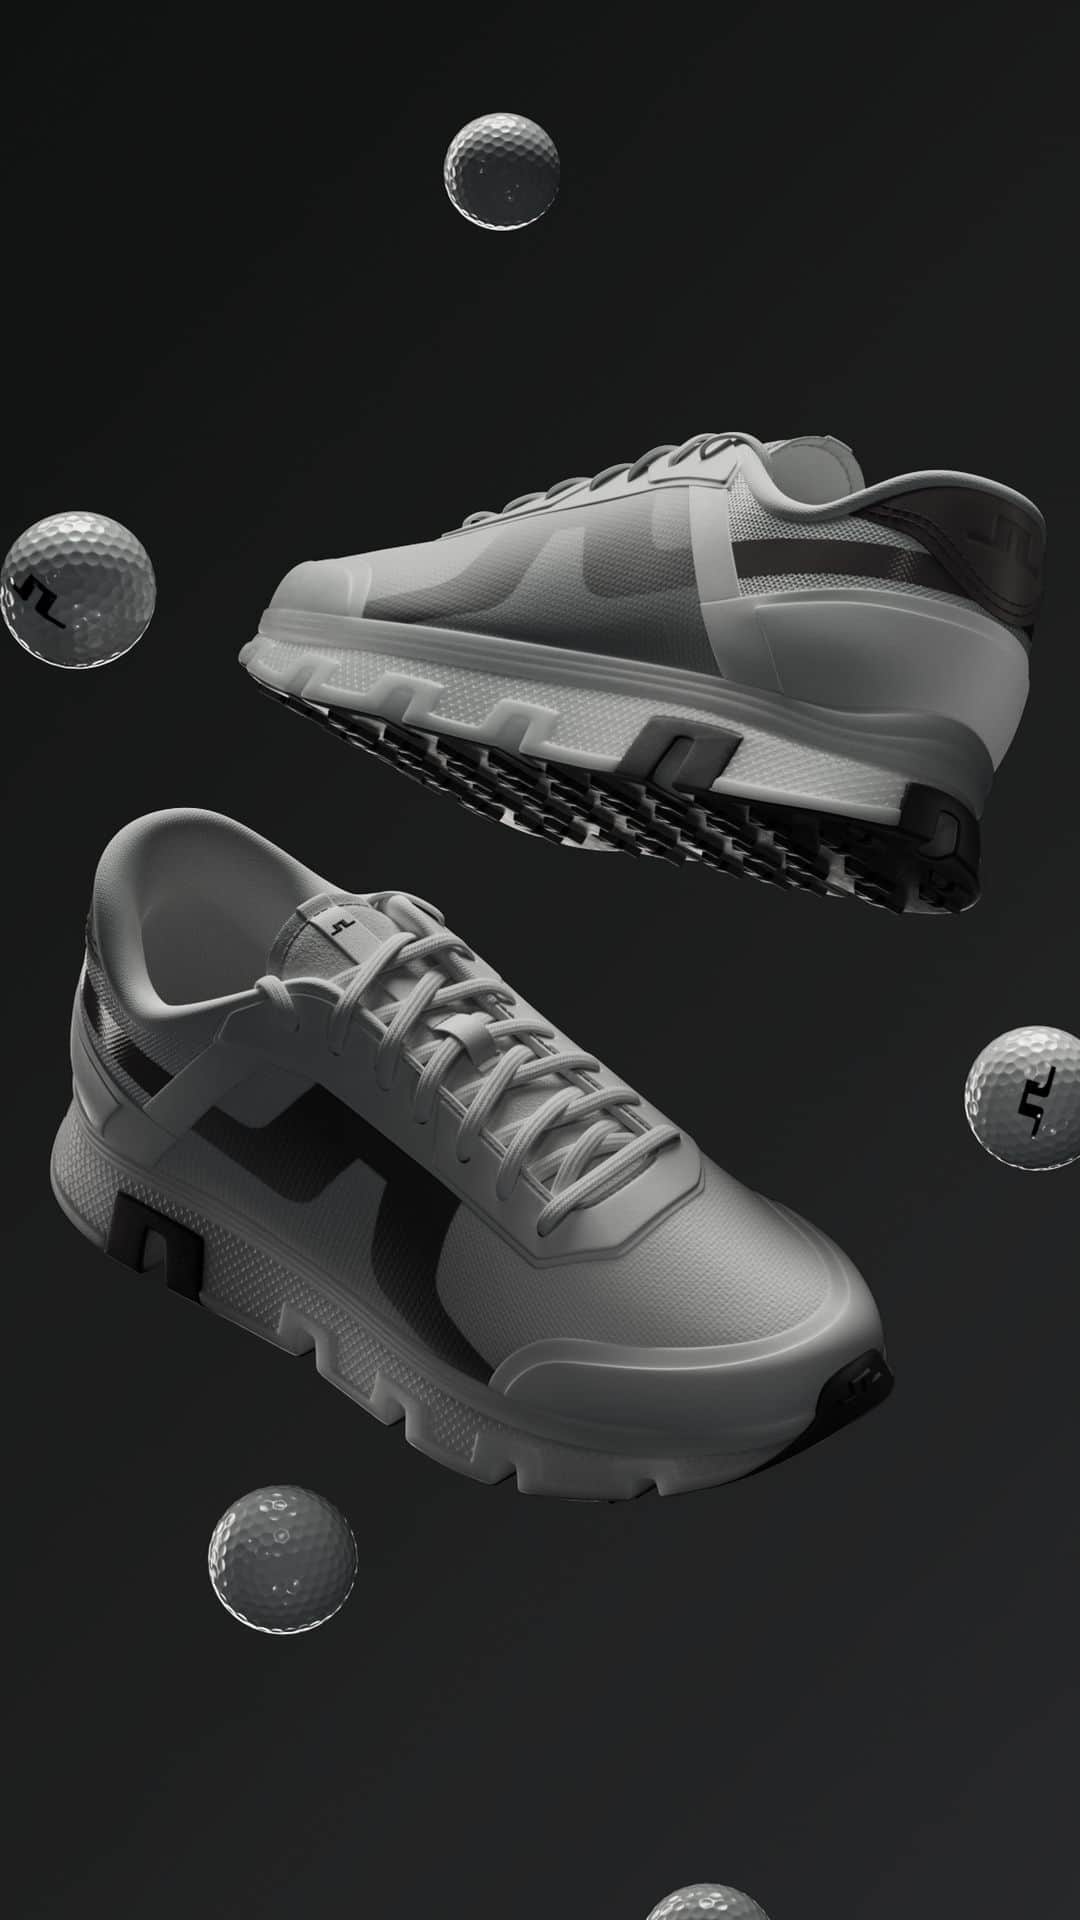 Jリンドバーグのインスタグラム：「Launching today: our new signature golf sneaker, Vent 500 – ideal for both on and off the course.  Designed to redefine golf fashion, they’re crafted from high-quality materials merged with a streetwear-inspired aesthetic. The custom Bridge logo outsole has been developed exclusively for J.Lindeberg for extra style, while the waterproof seam seal technology and mesh upper provide protection.  Now available at jlindeberg.com and in stores.」